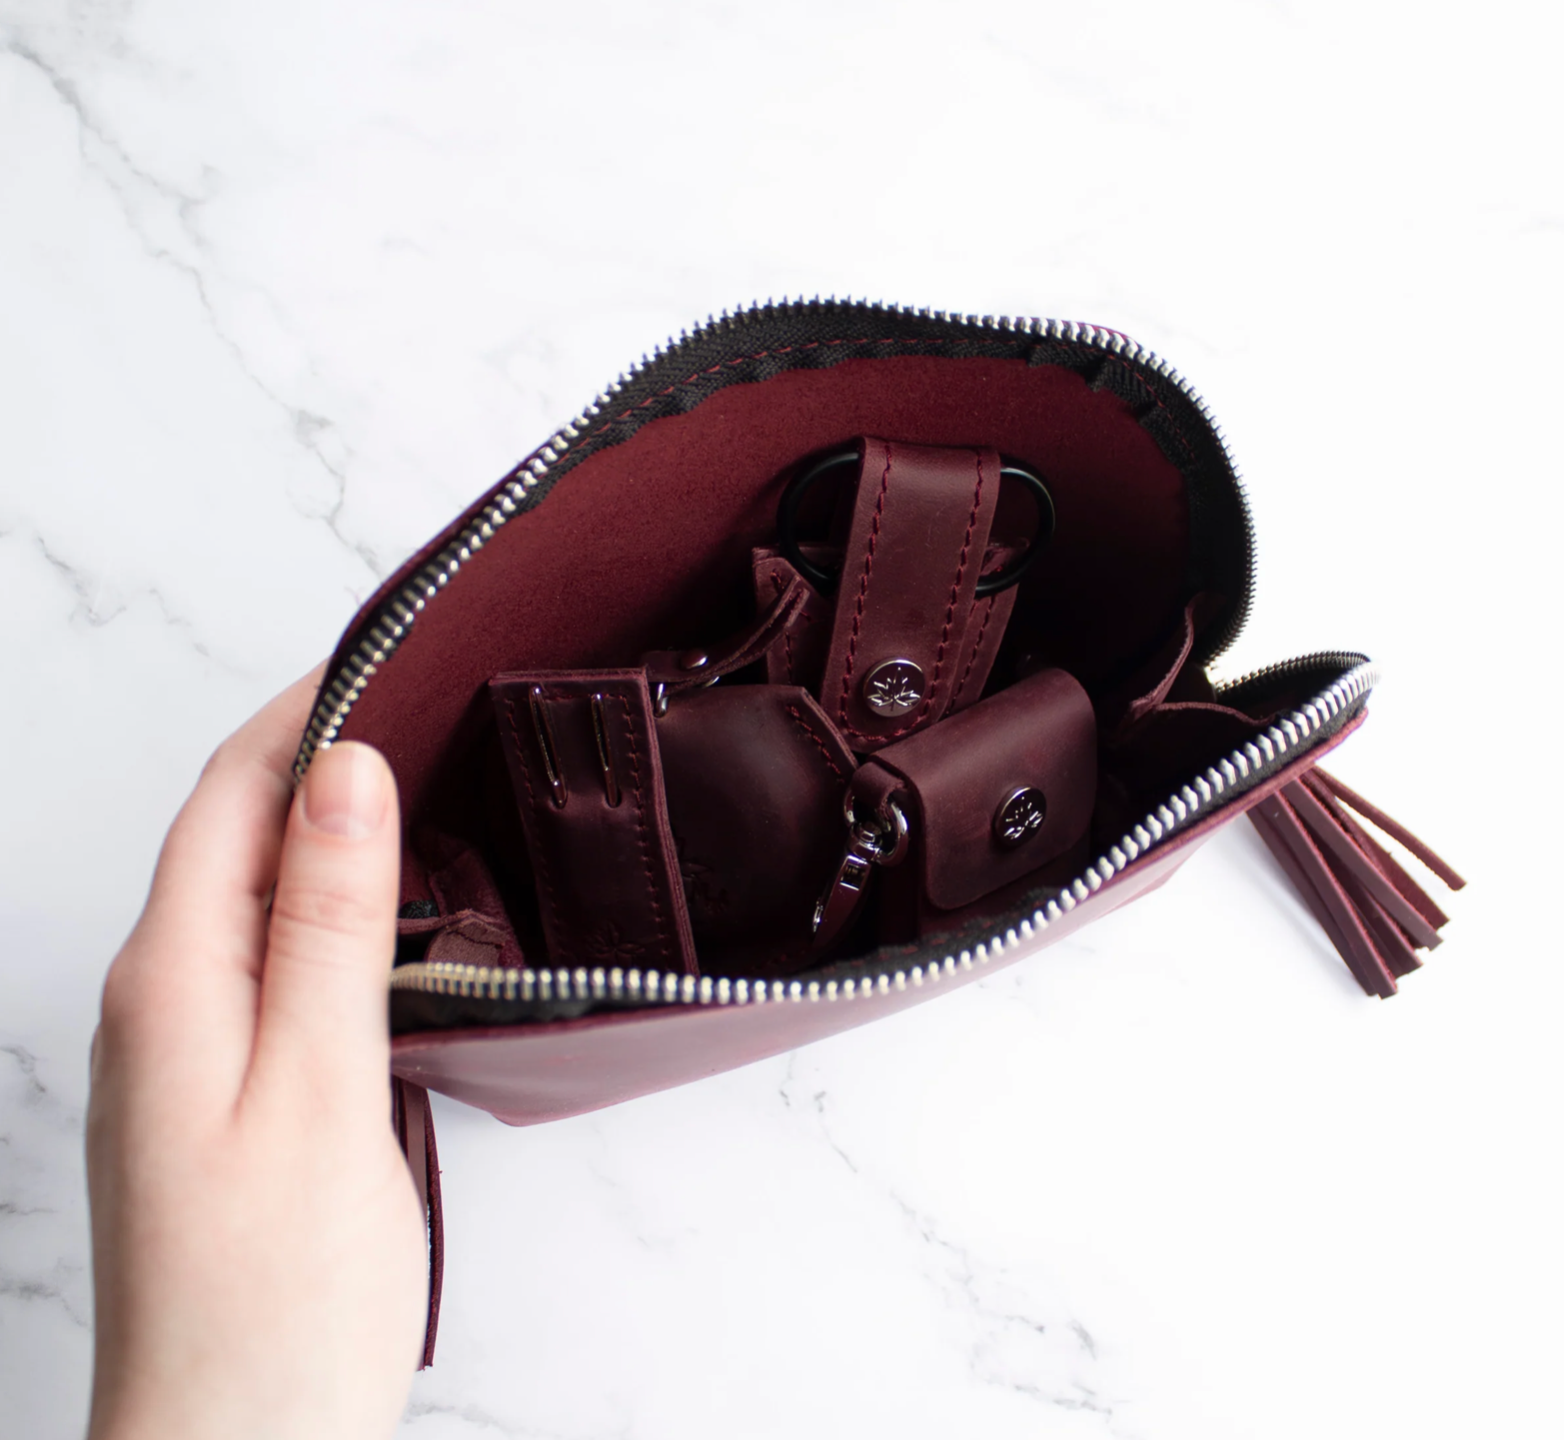 Thread & Maple - Leather Notion Zip Pouch